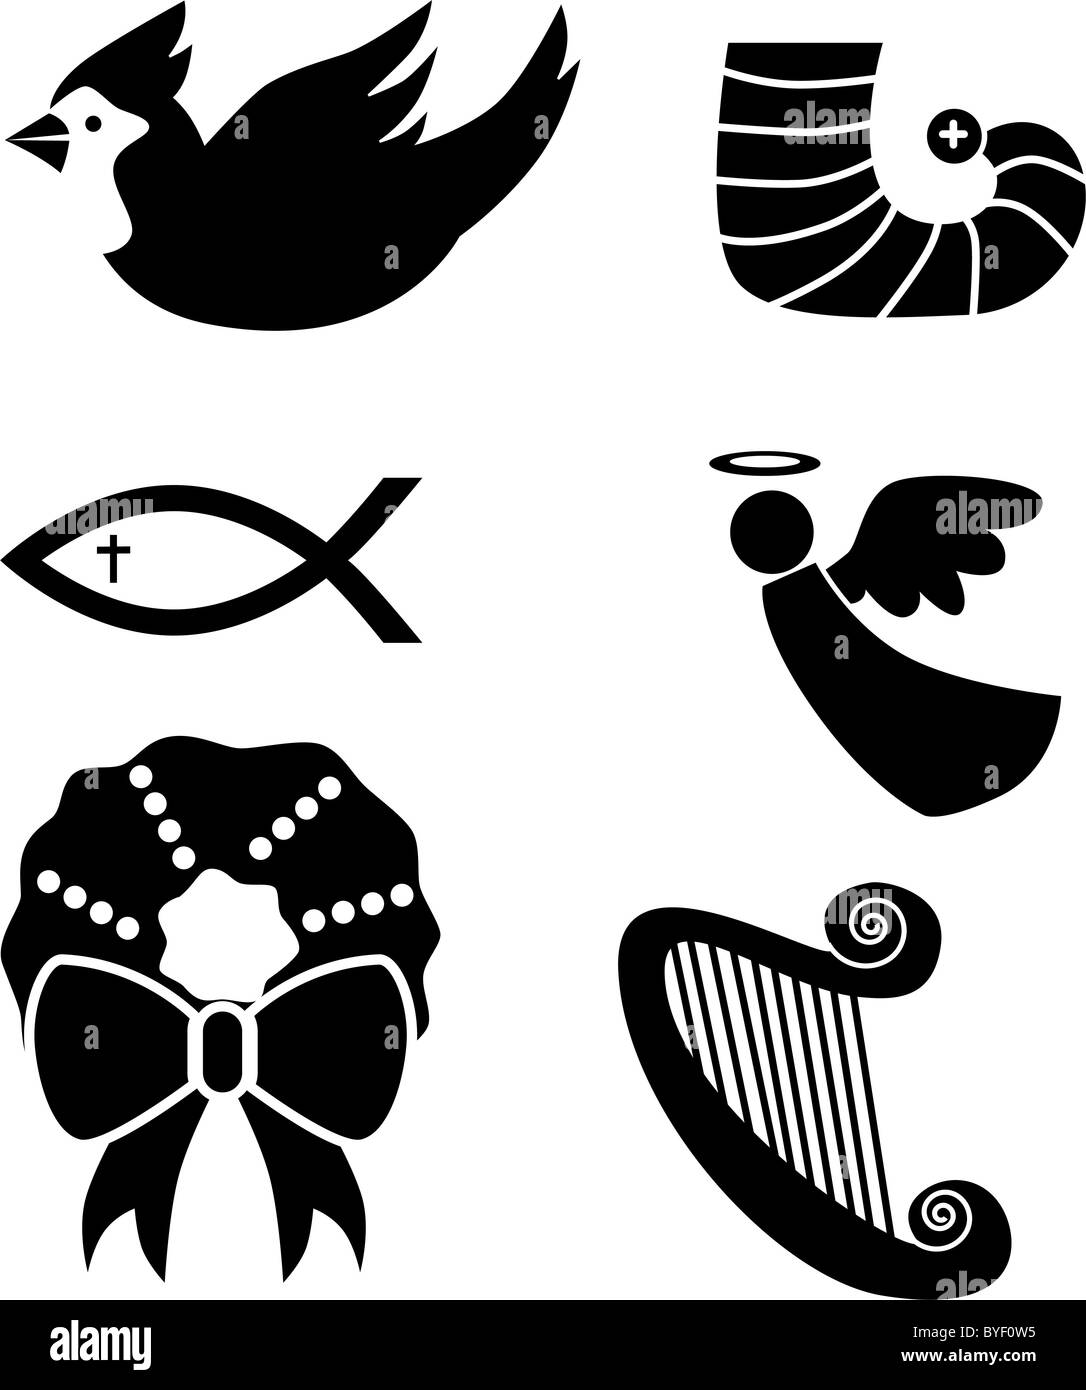 Set of 6 holiday icons in black. Stock Photo